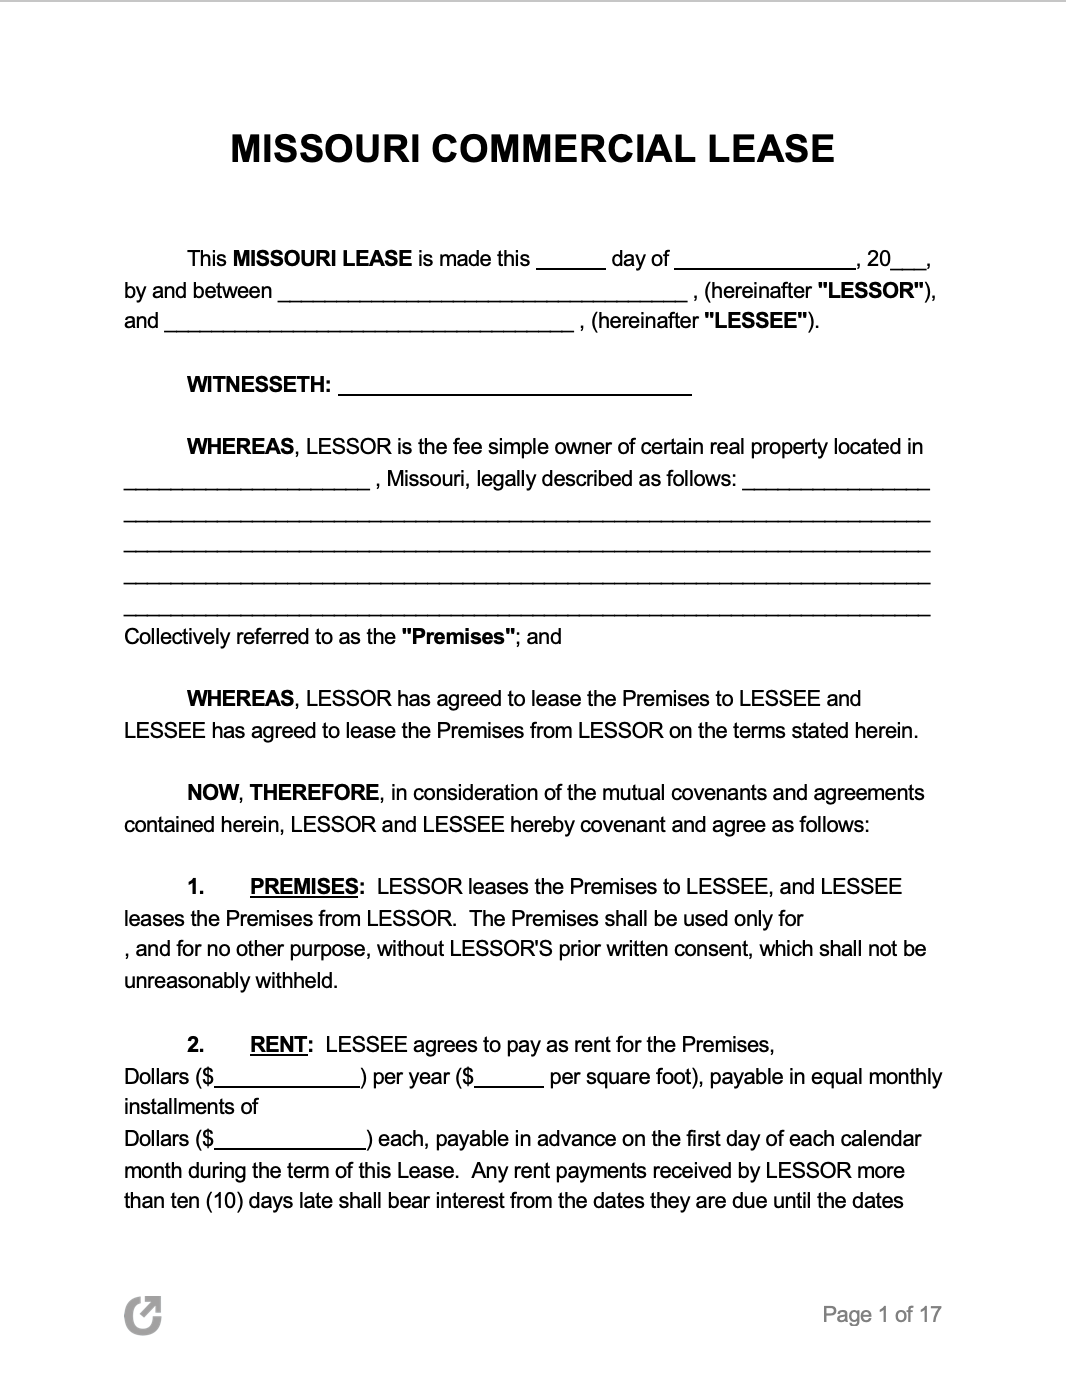 Free Missouri Commercial Lease Agreement  PDF  WORD Inside commercial lease agreement template word